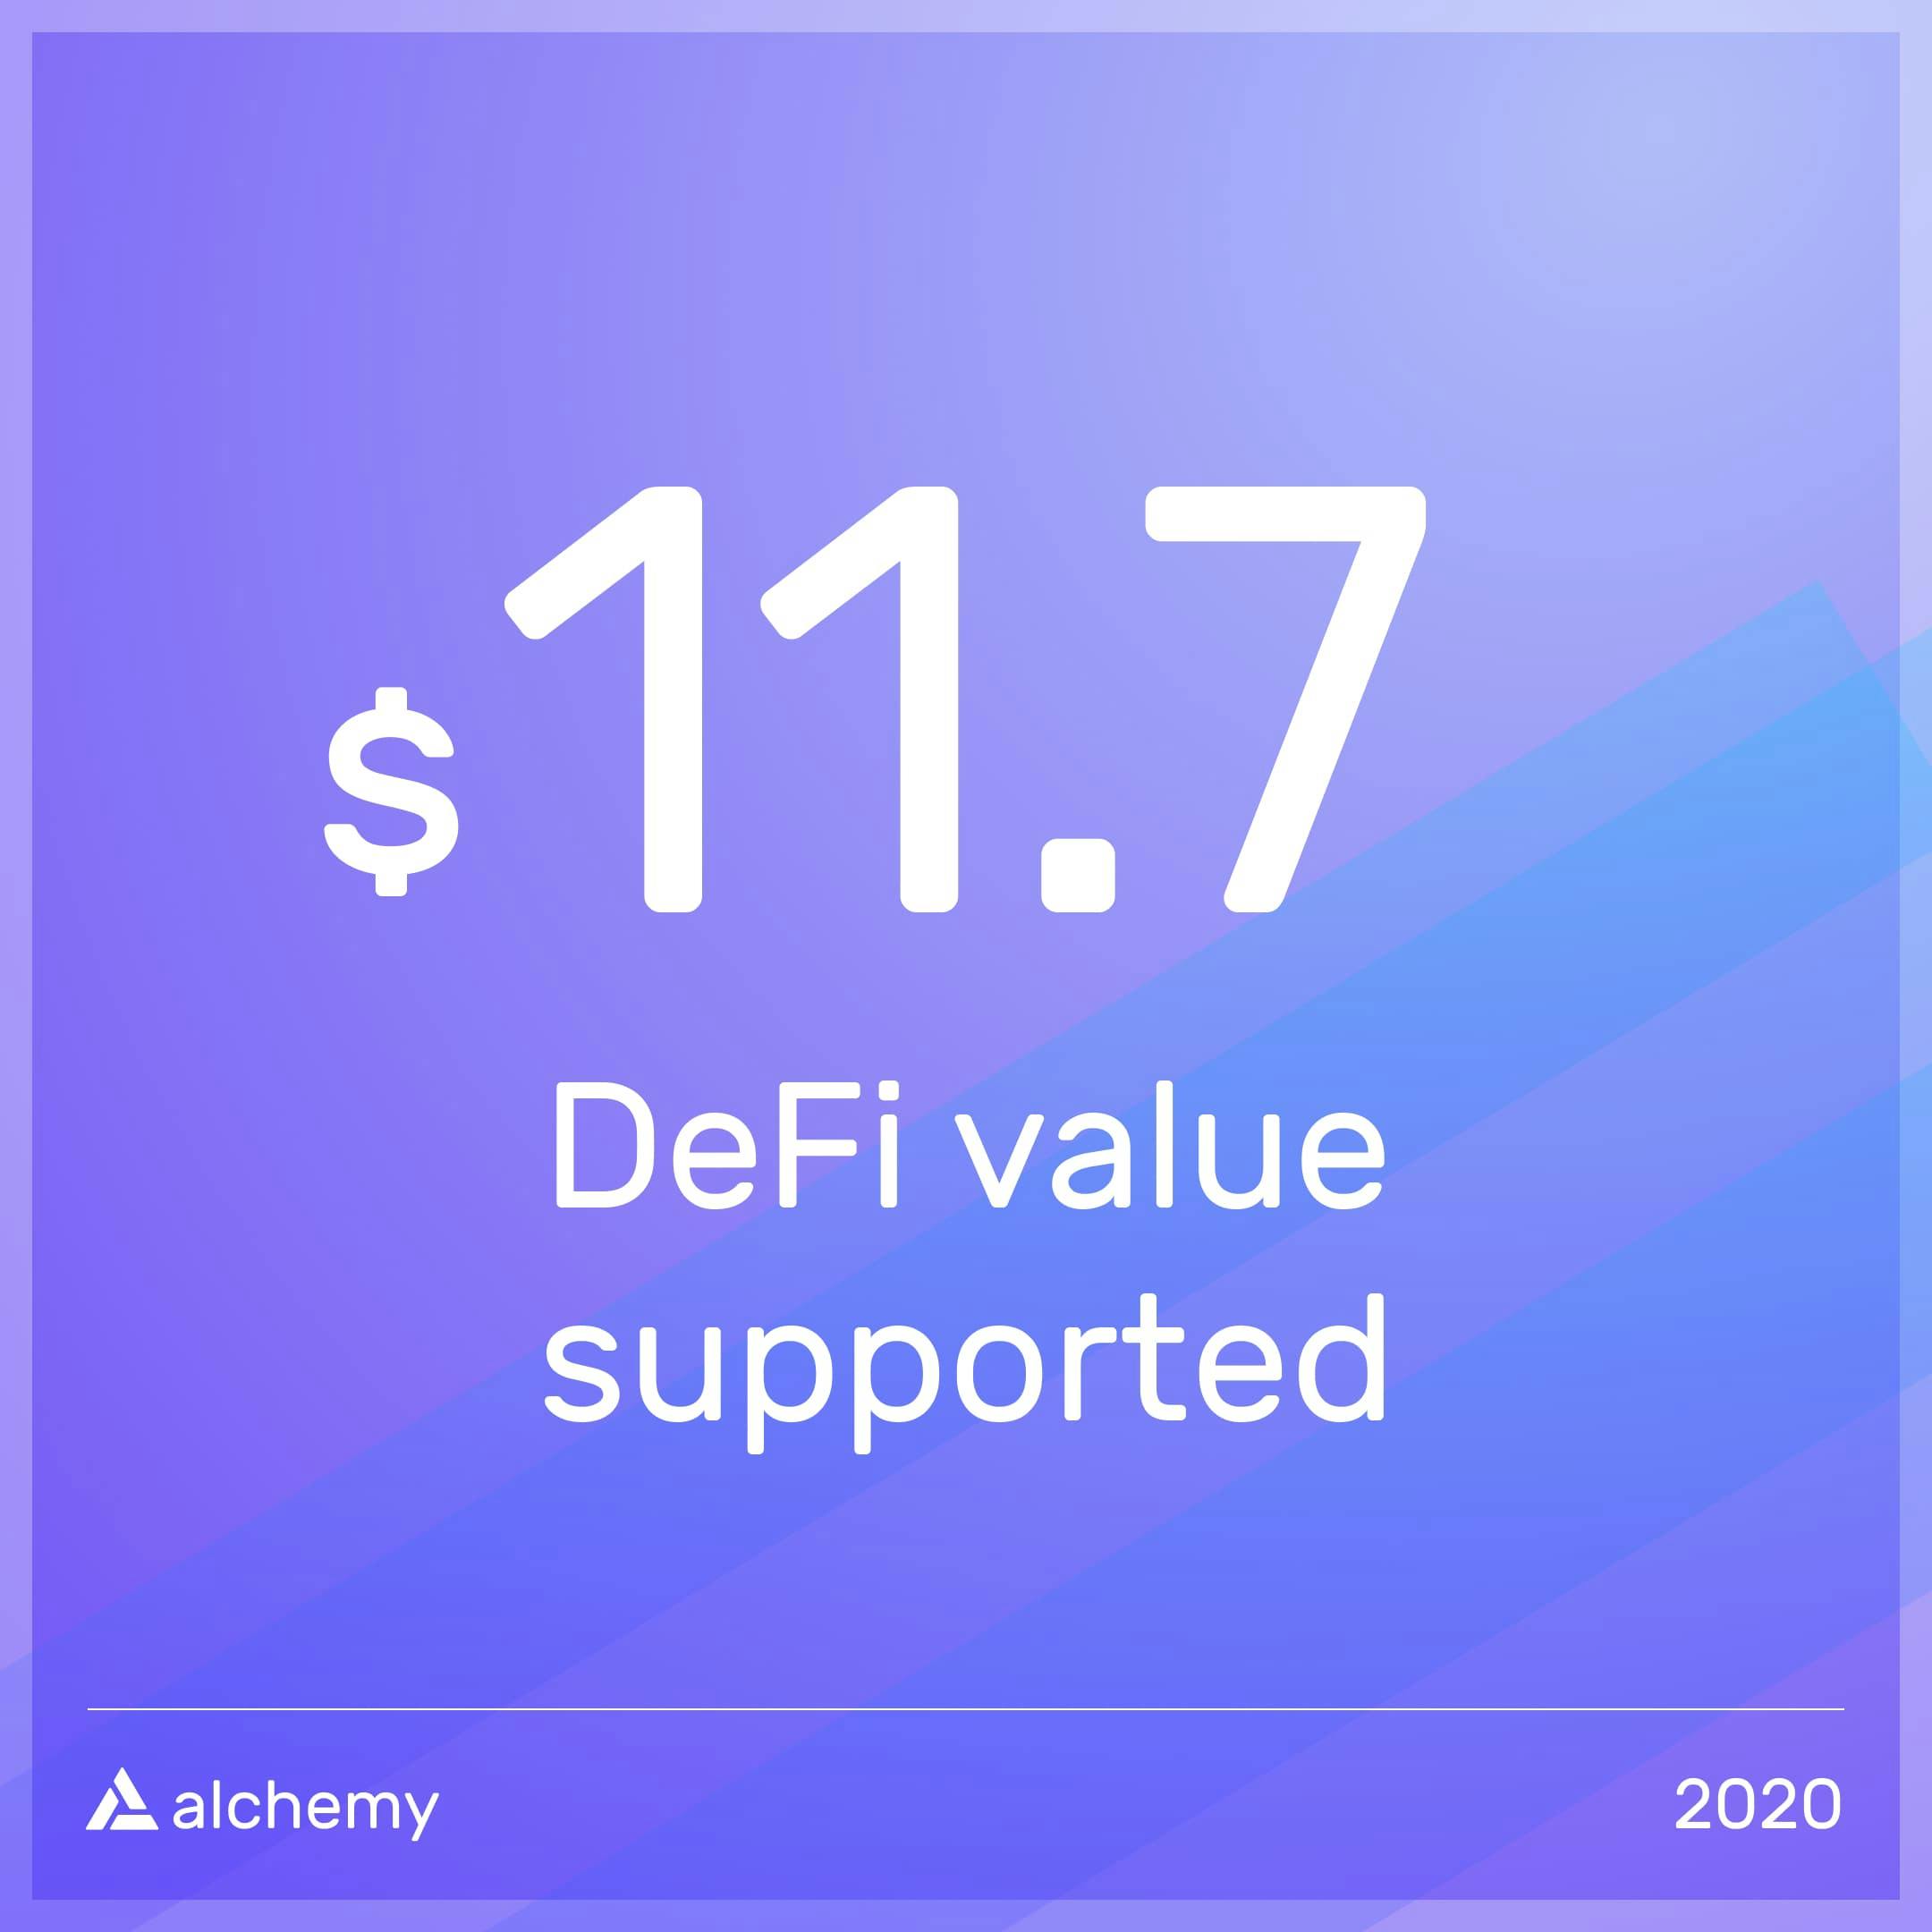 $11.7 DeFi value supported